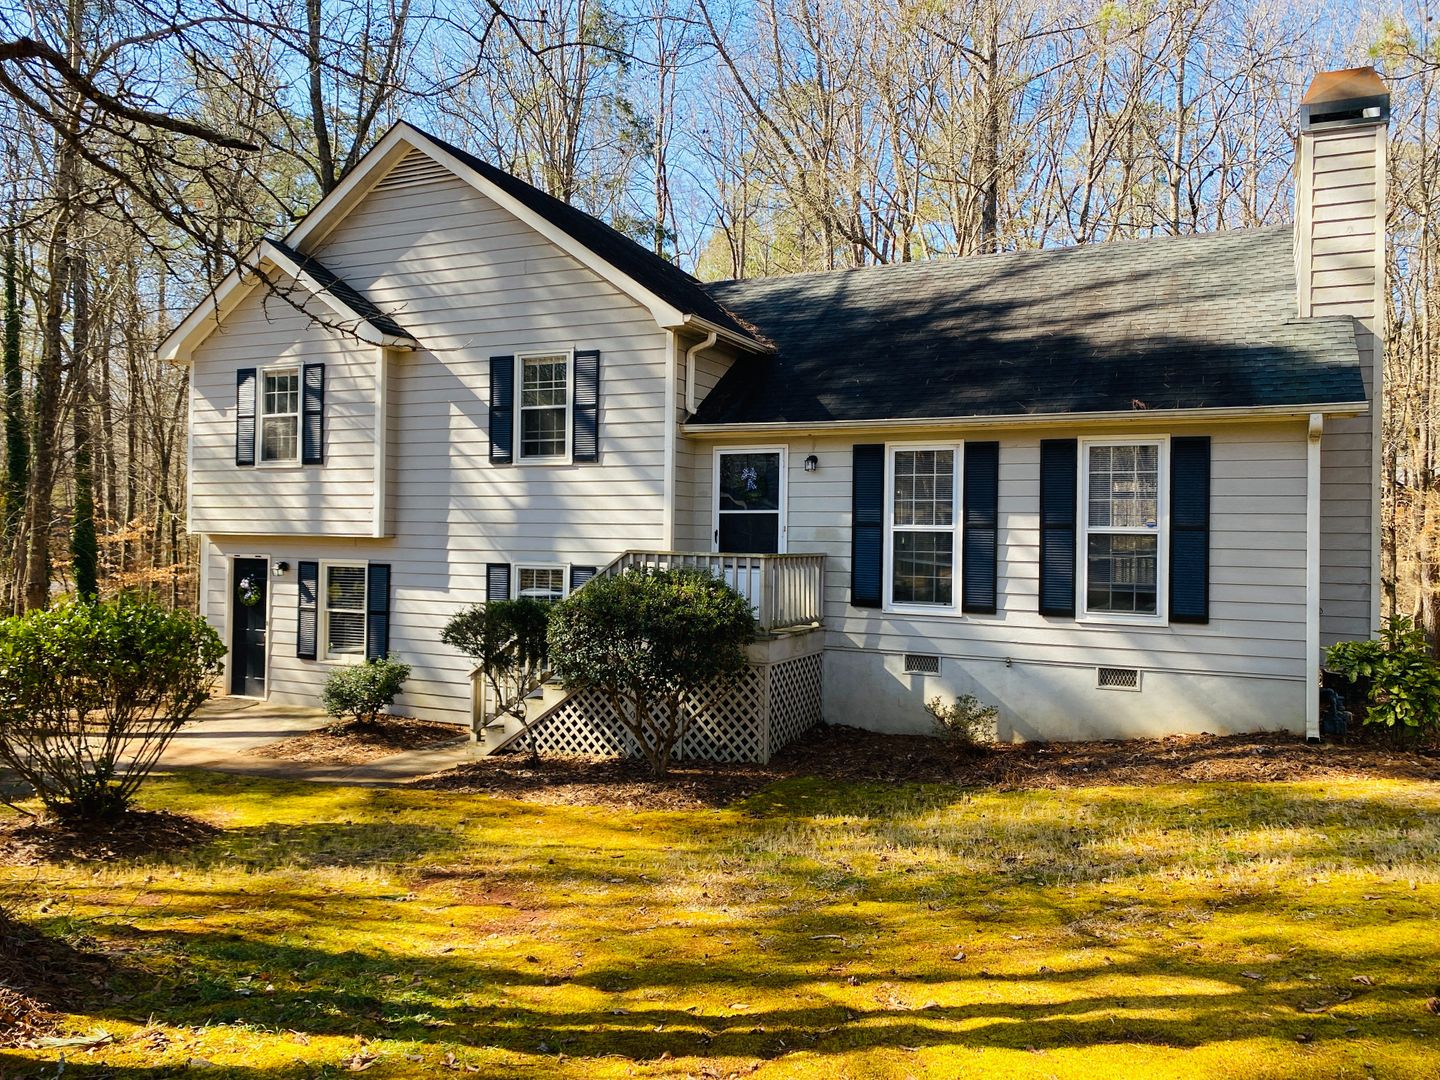 PRE-LEASE FOR JULY 12th! Charming 3 bedroom house on the east side Athens, GA